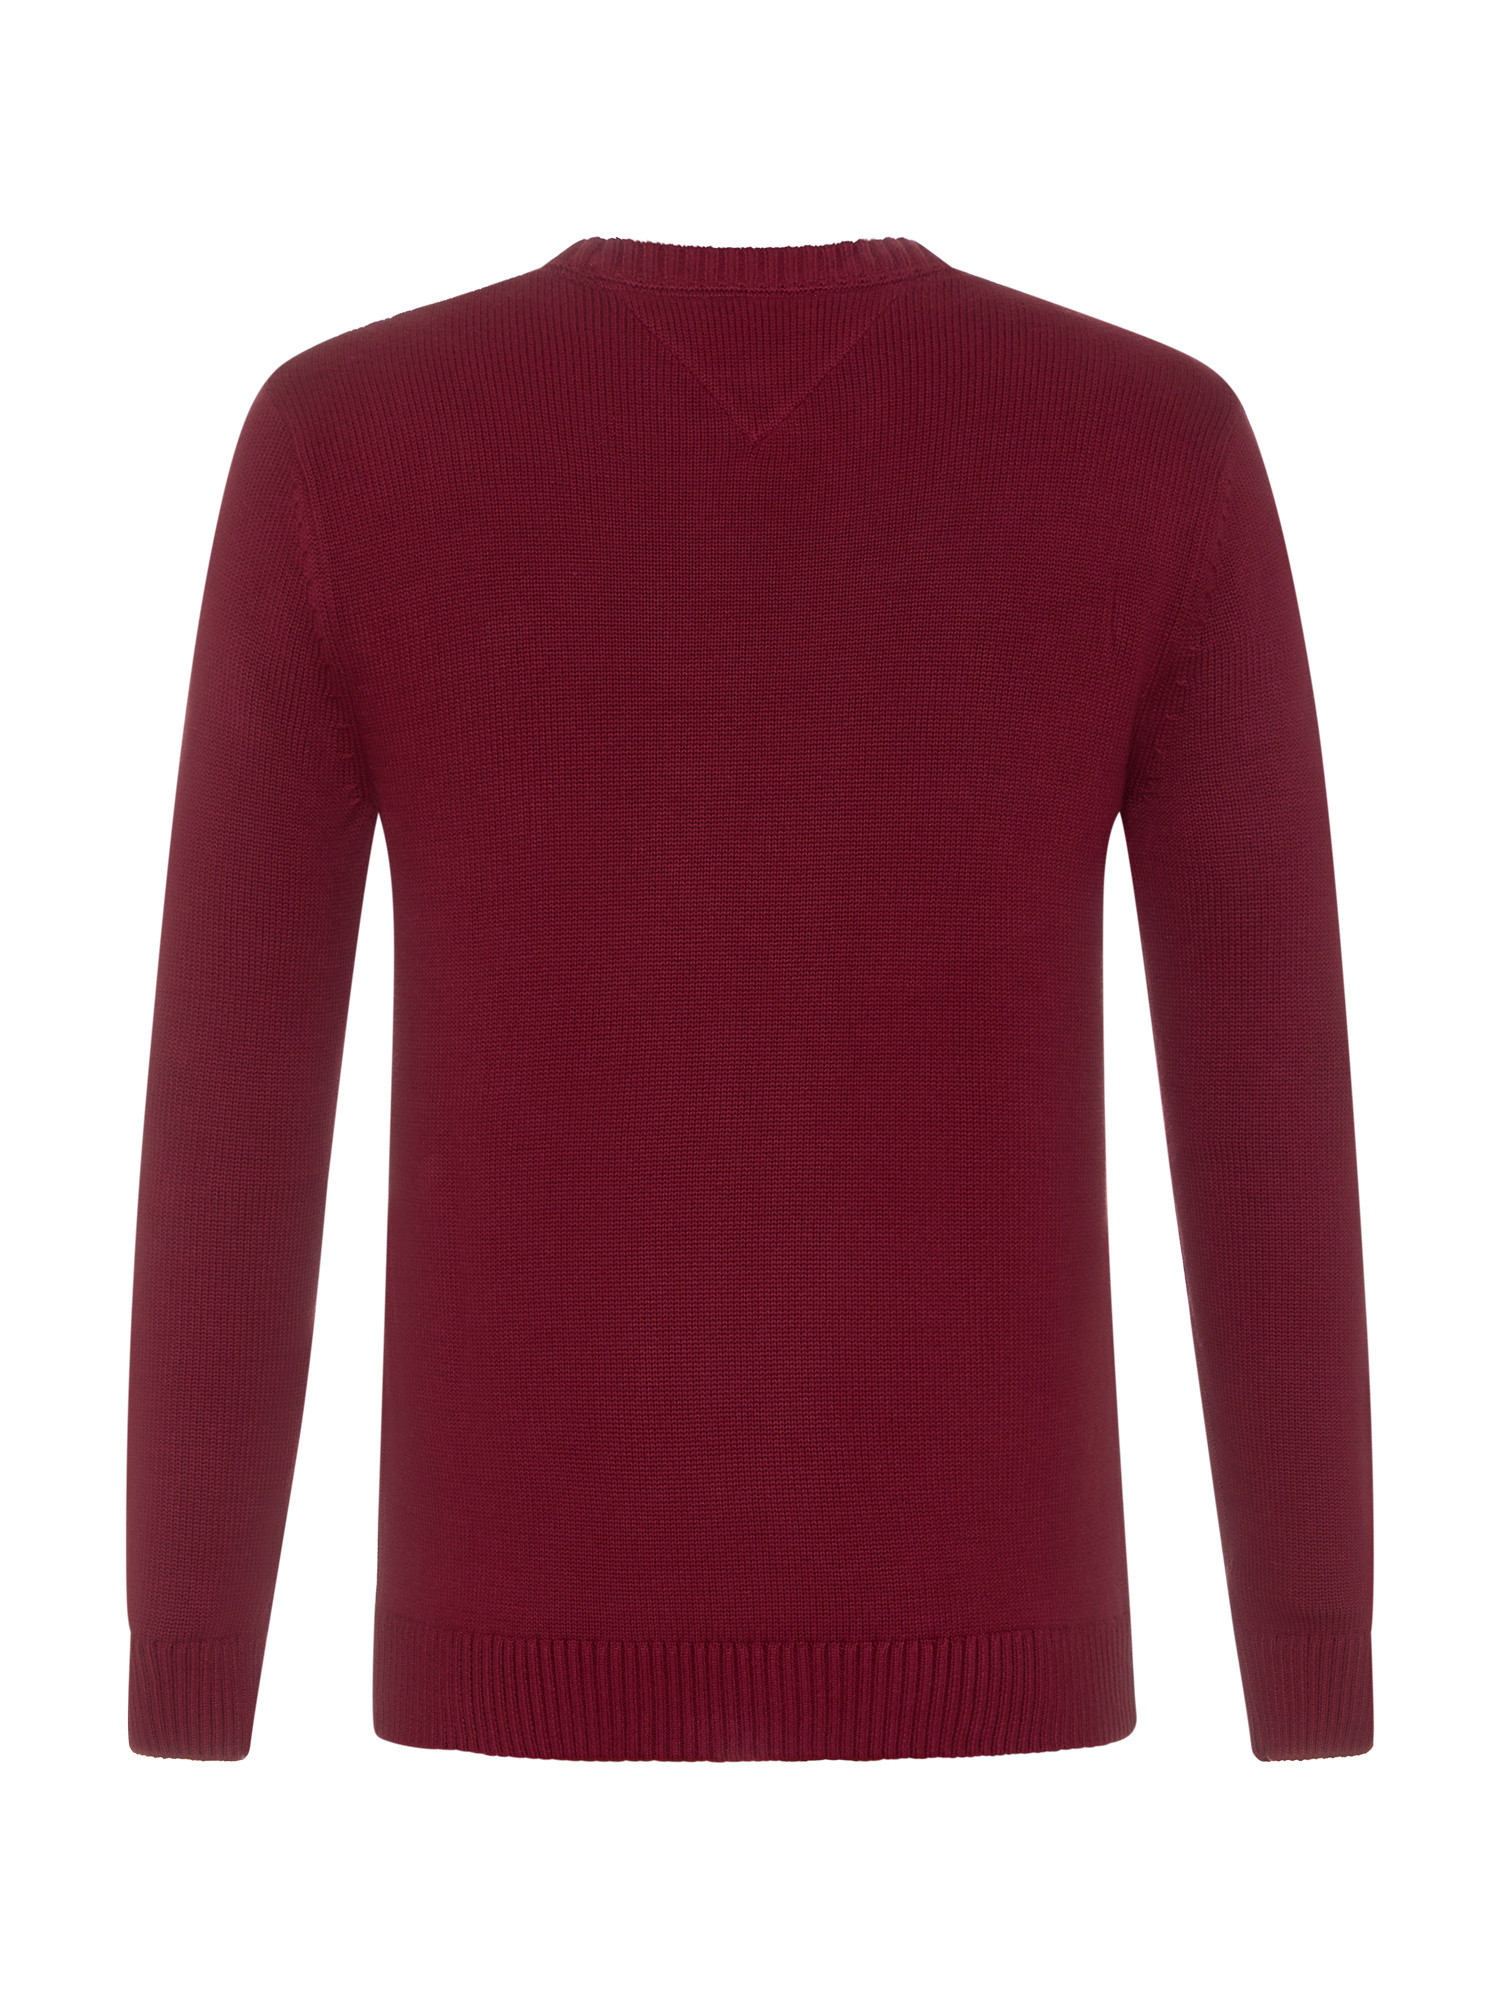 Tommy Jeans - Pullover in cotone regular fit con micro logo, Rosso, large image number 1